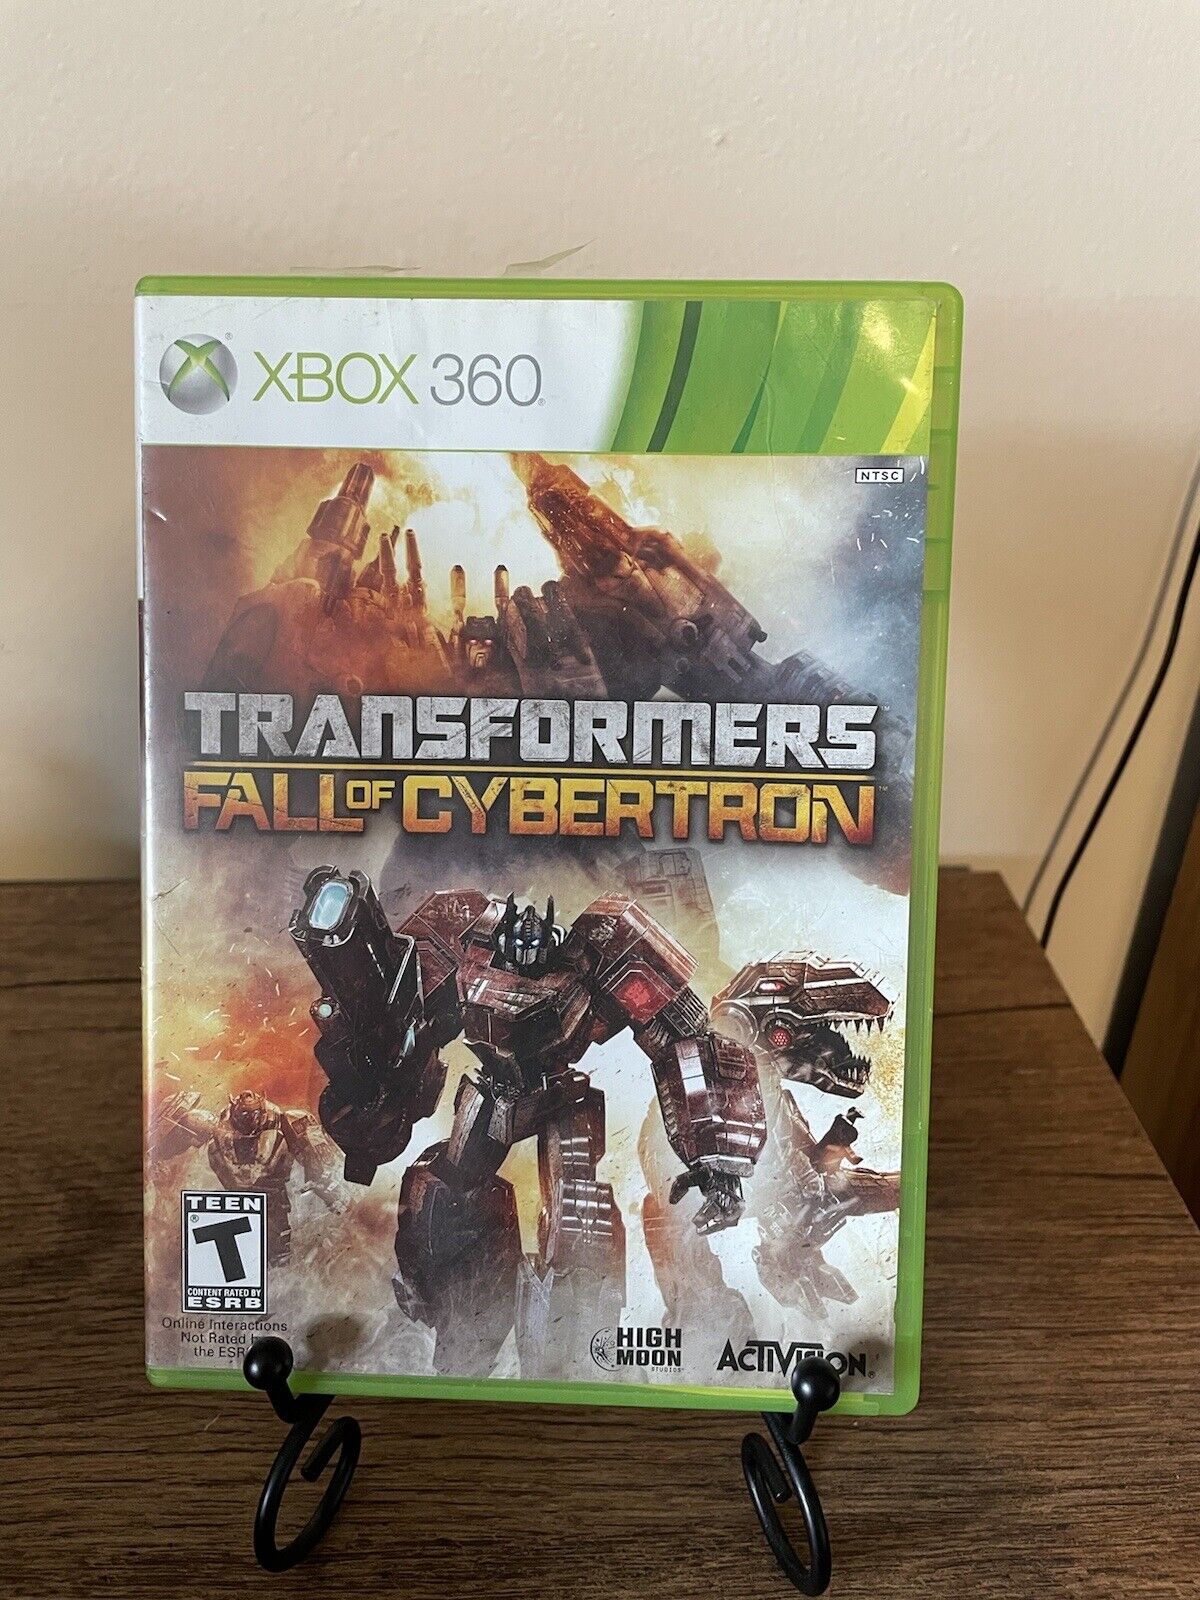 Transformers: Fall of Cybertron Xbox 360 No Slipcover But Otherwise Complete CIB